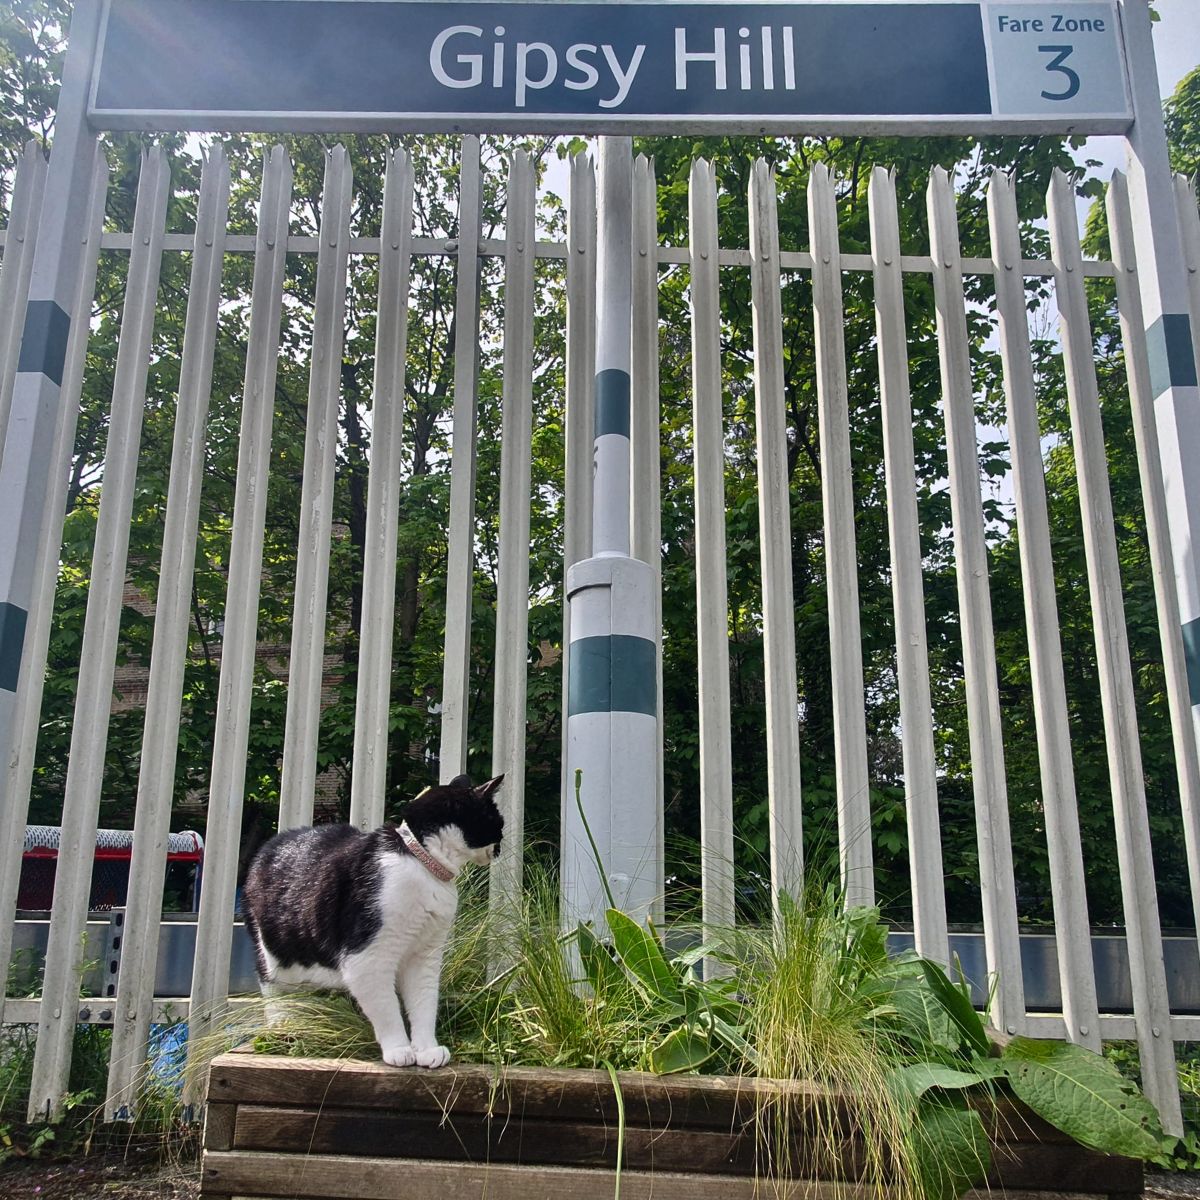 photo of cat at railway station